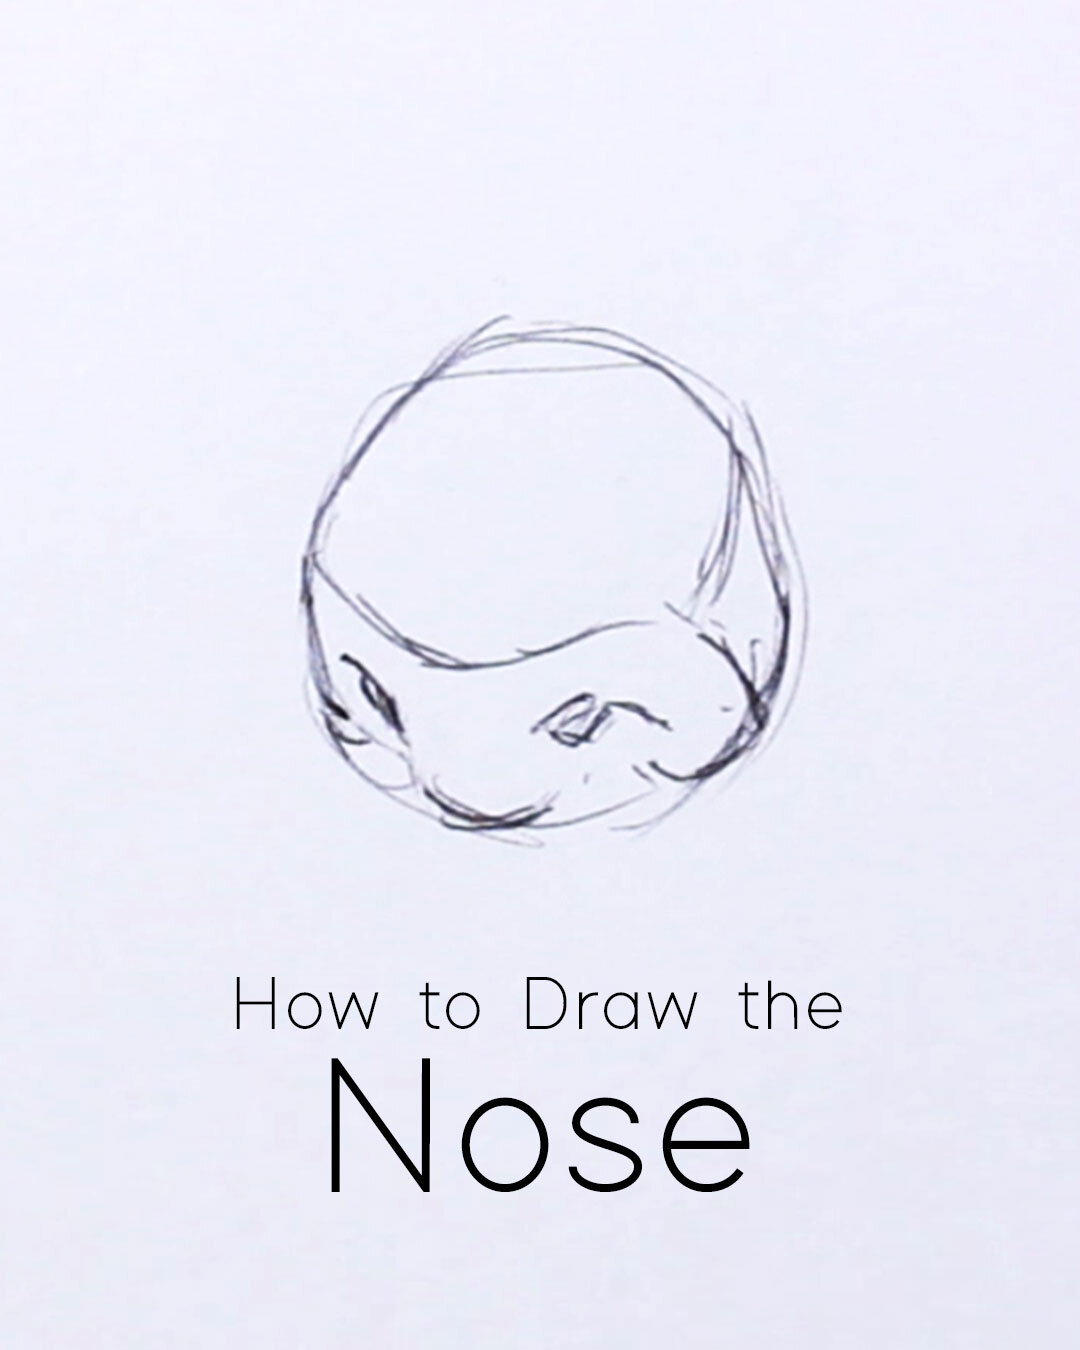 How to Draw a Nose from an Angle without Shading in 5 Steps #anatomy #nose #drawing #arttutorial